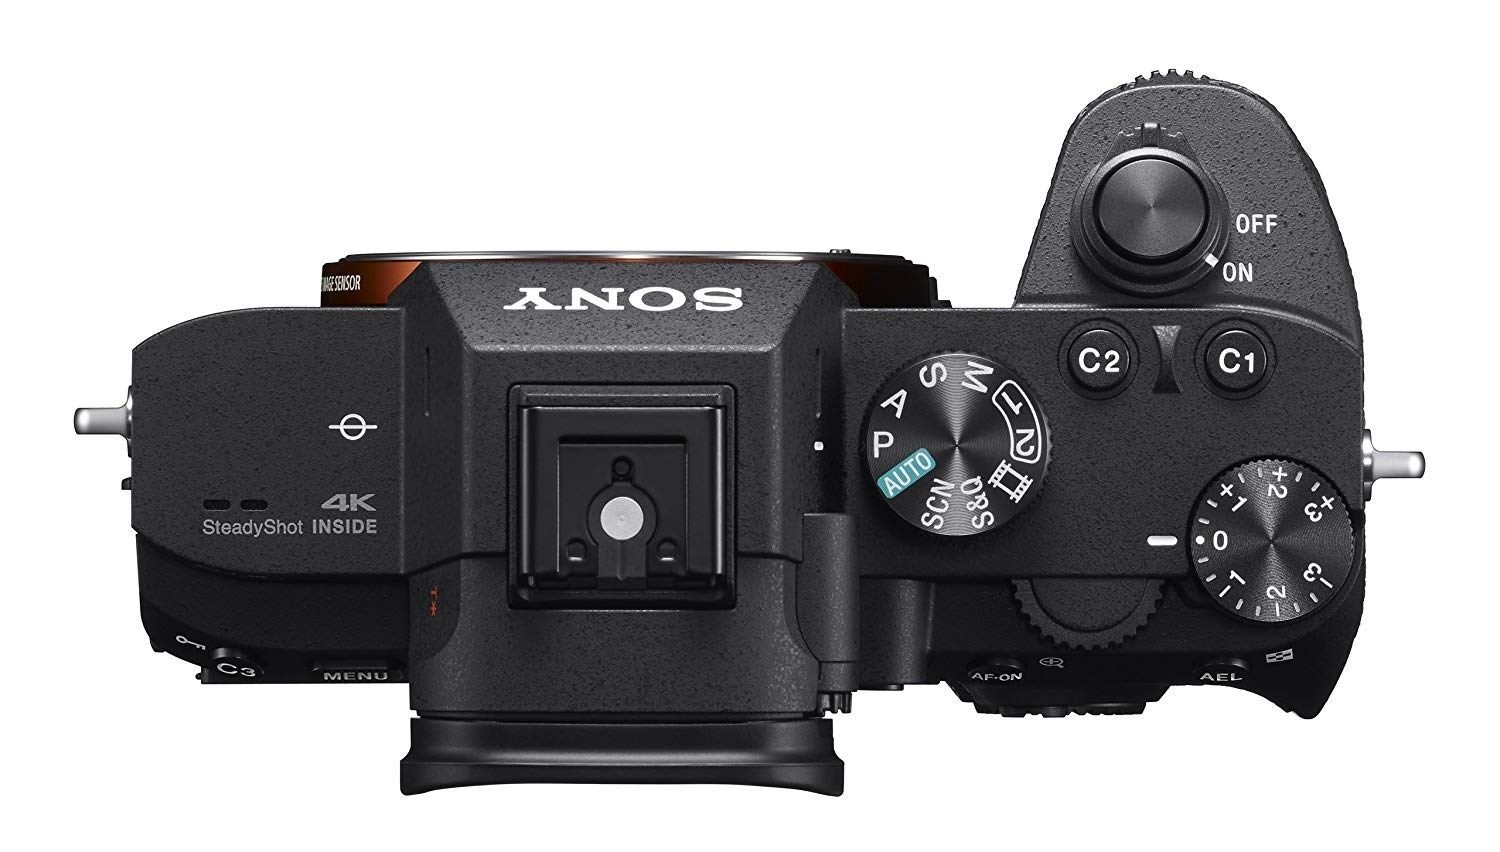 Sony Alpha a7 III Mirrorless Camera - Body only - Product Photo 6 - Top down view of the camera body showing the flash mount, controls and eyepiece / viewfinder